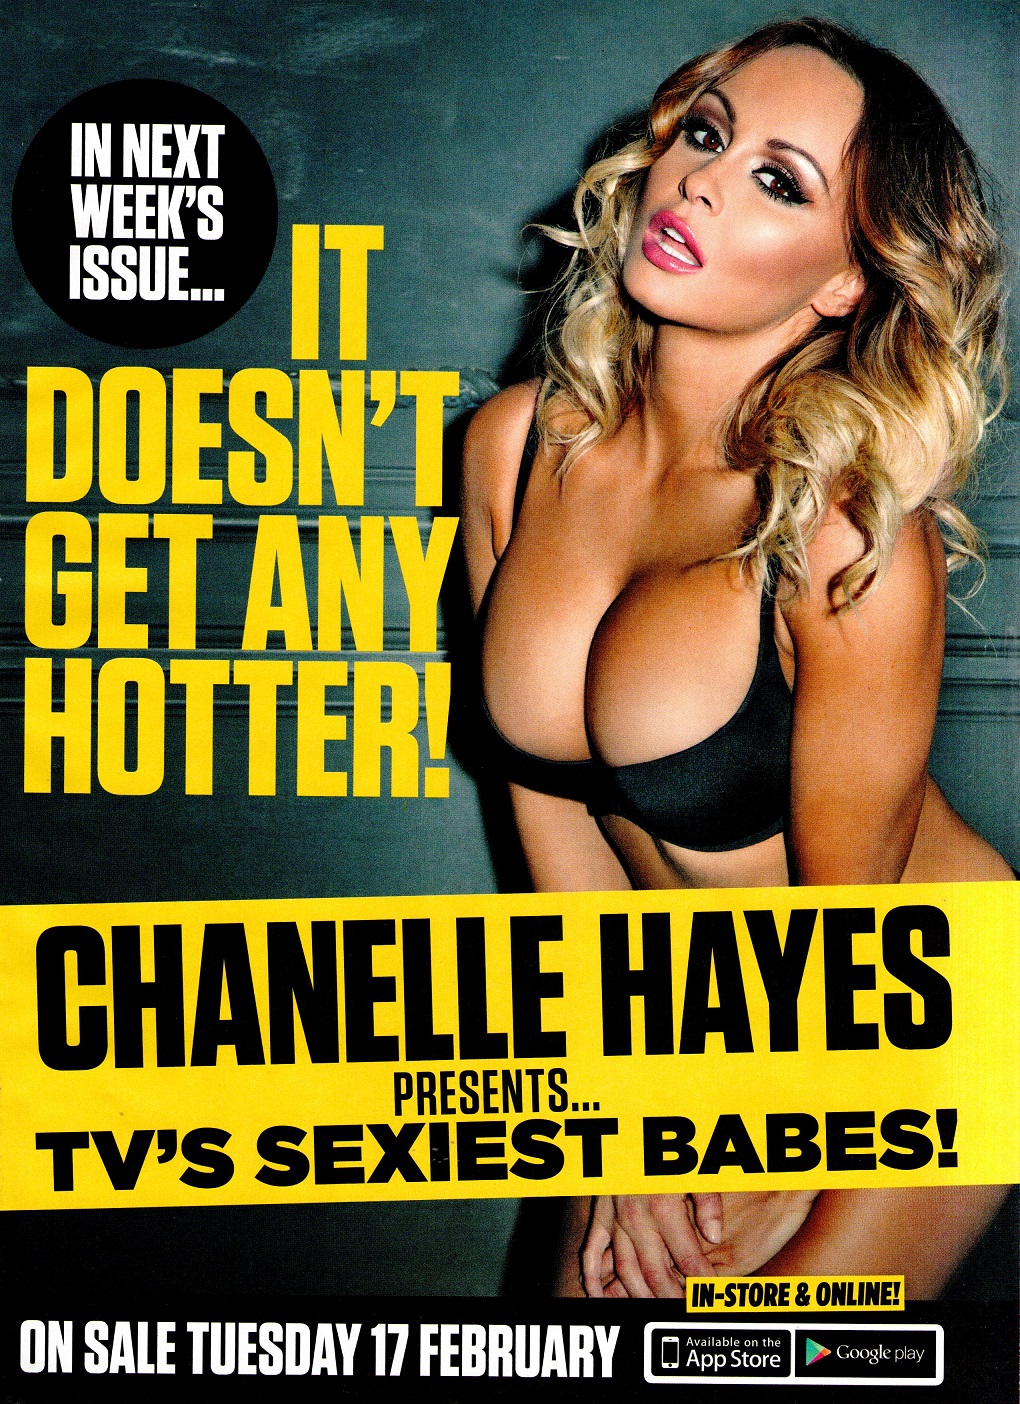 Chanelle Hayes presents “TV’s Bustiest Babes” for Zoo Magazine